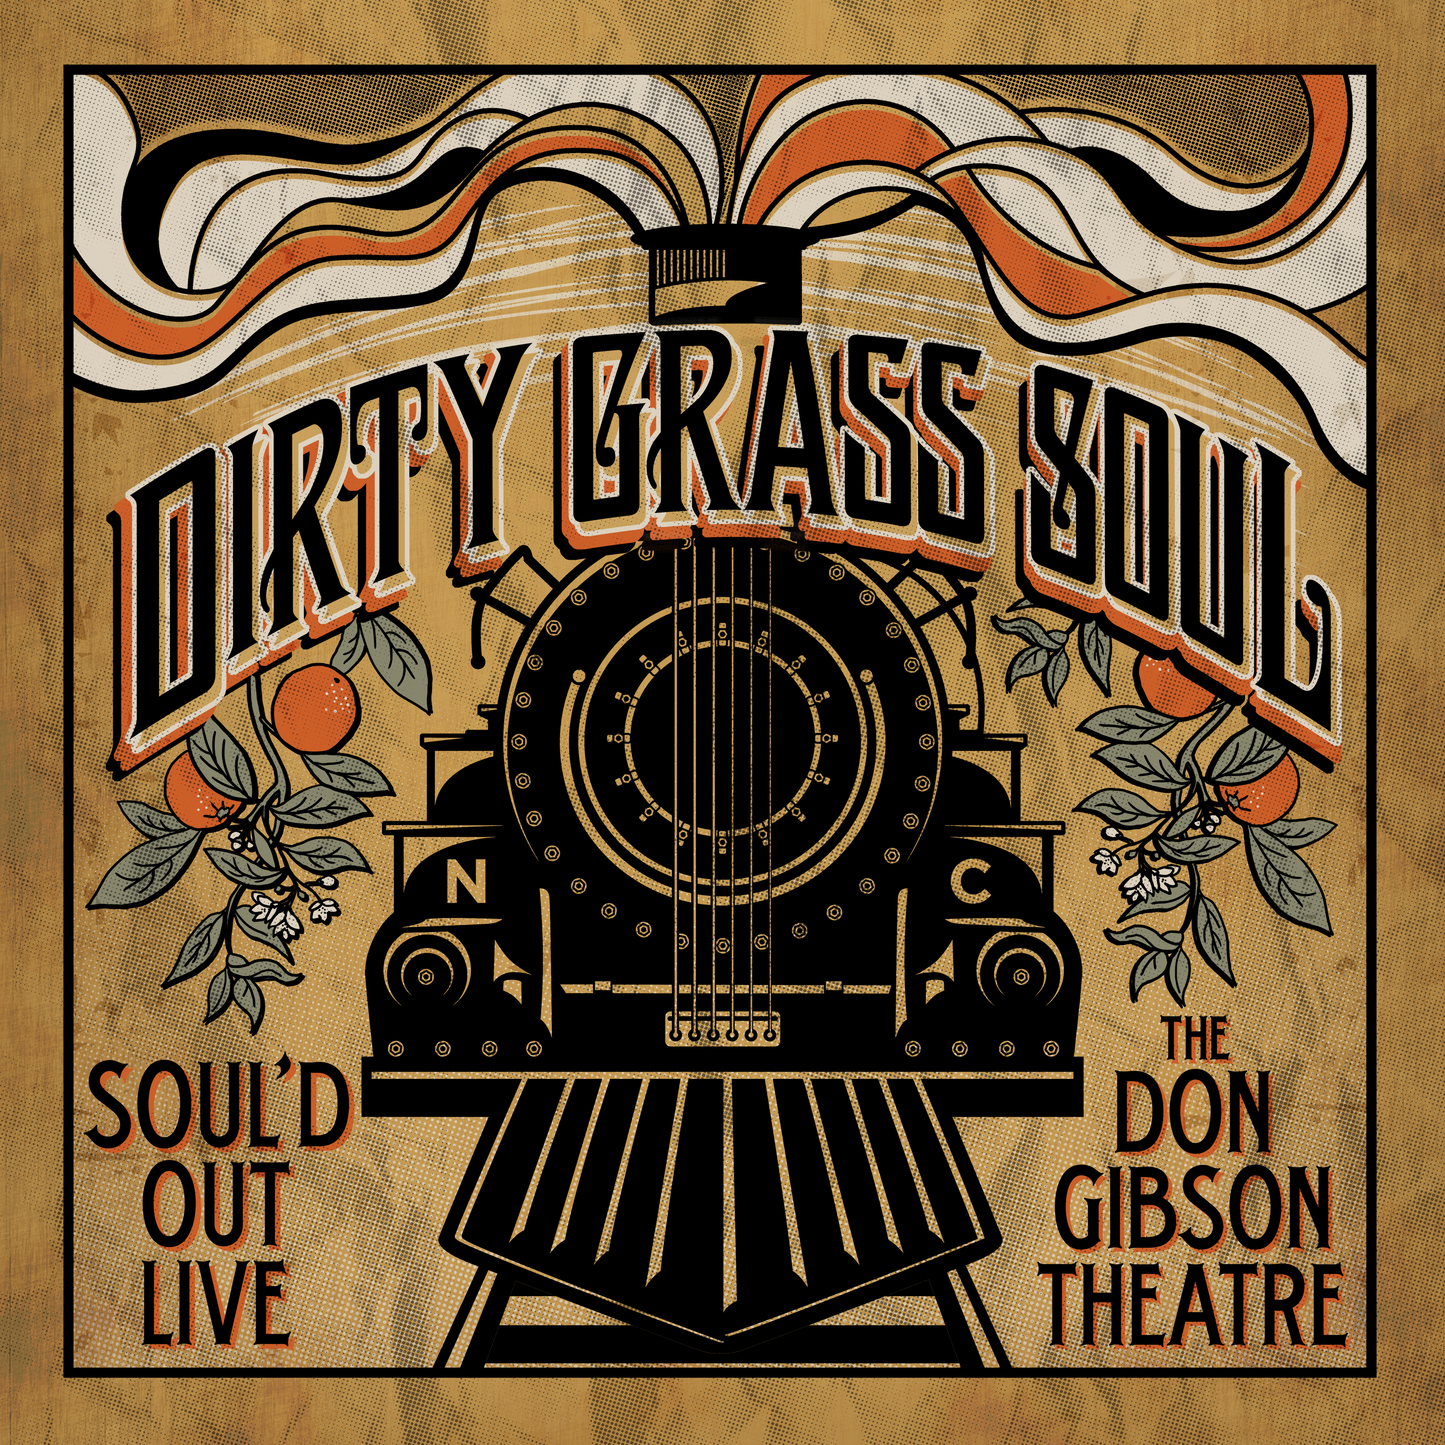 SOUL'D OUT: Live at The Don Gibson Theatre - 2 Disc Set